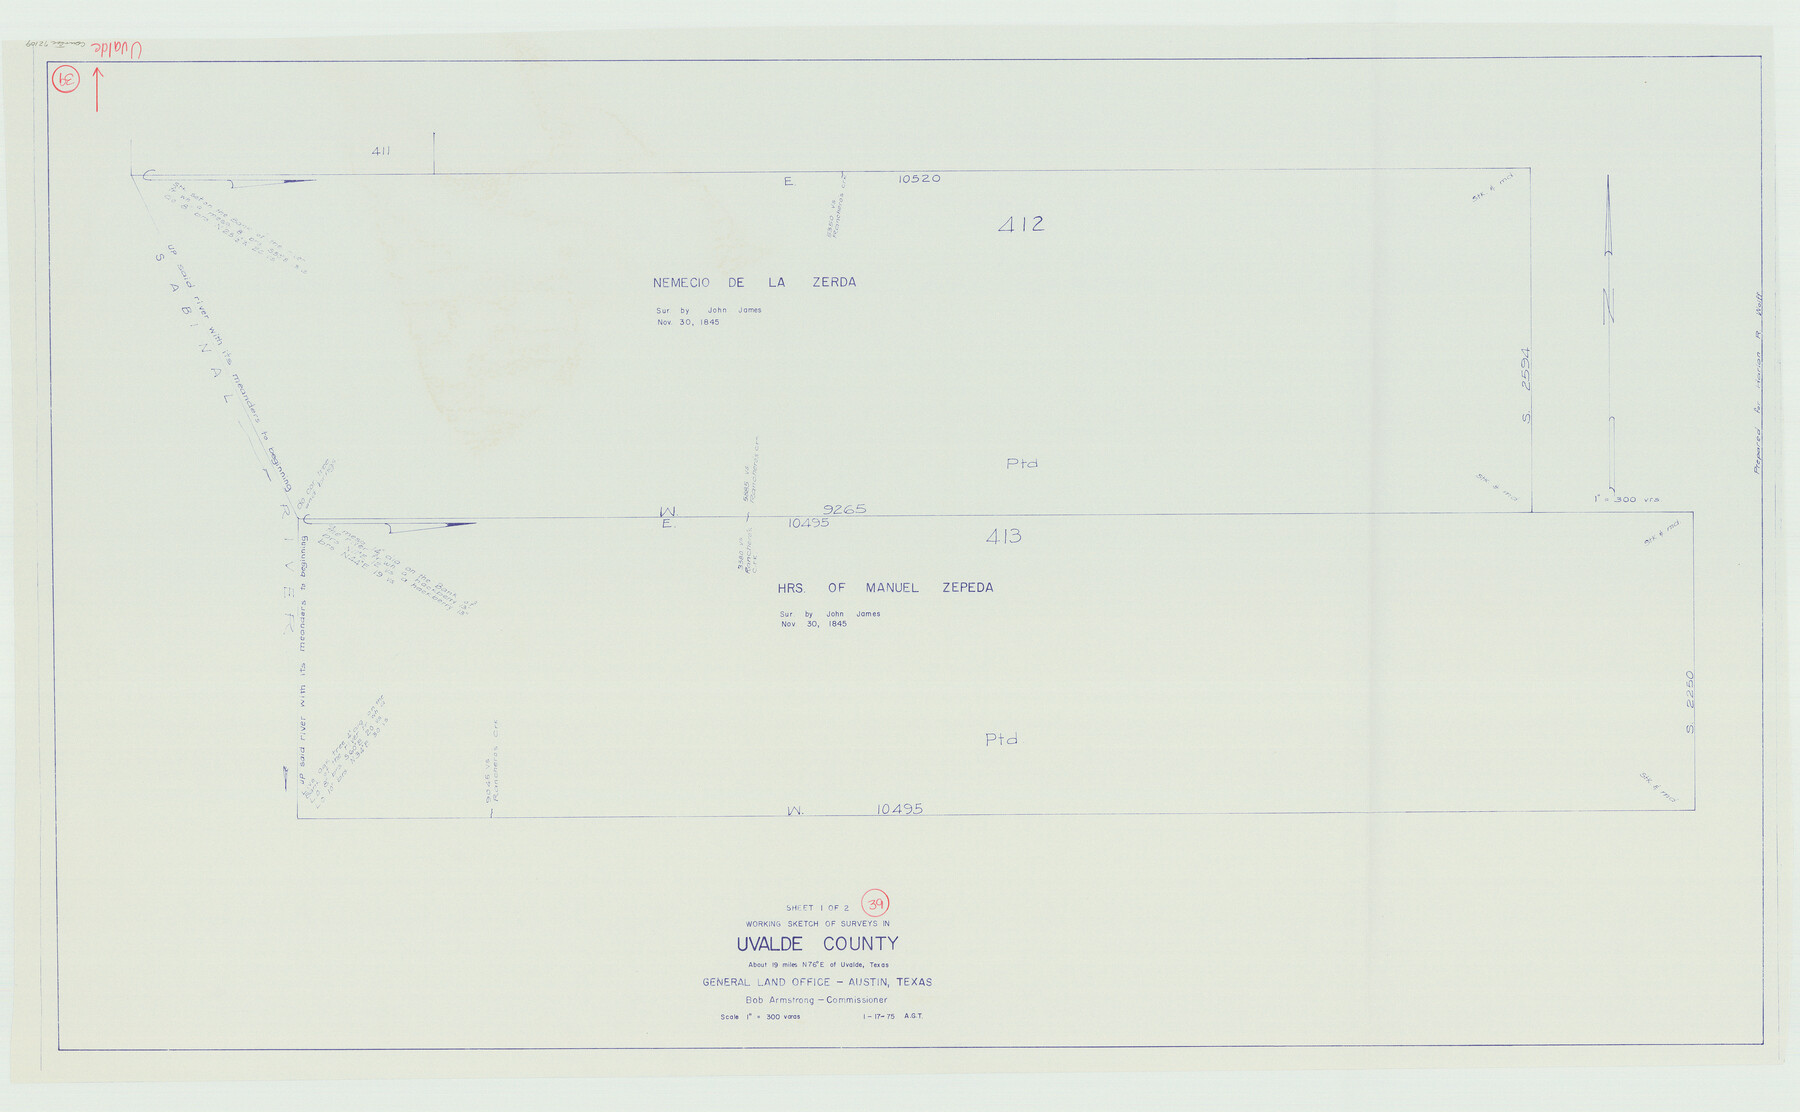 72109, Uvalde County Working Sketch 39, General Map Collection